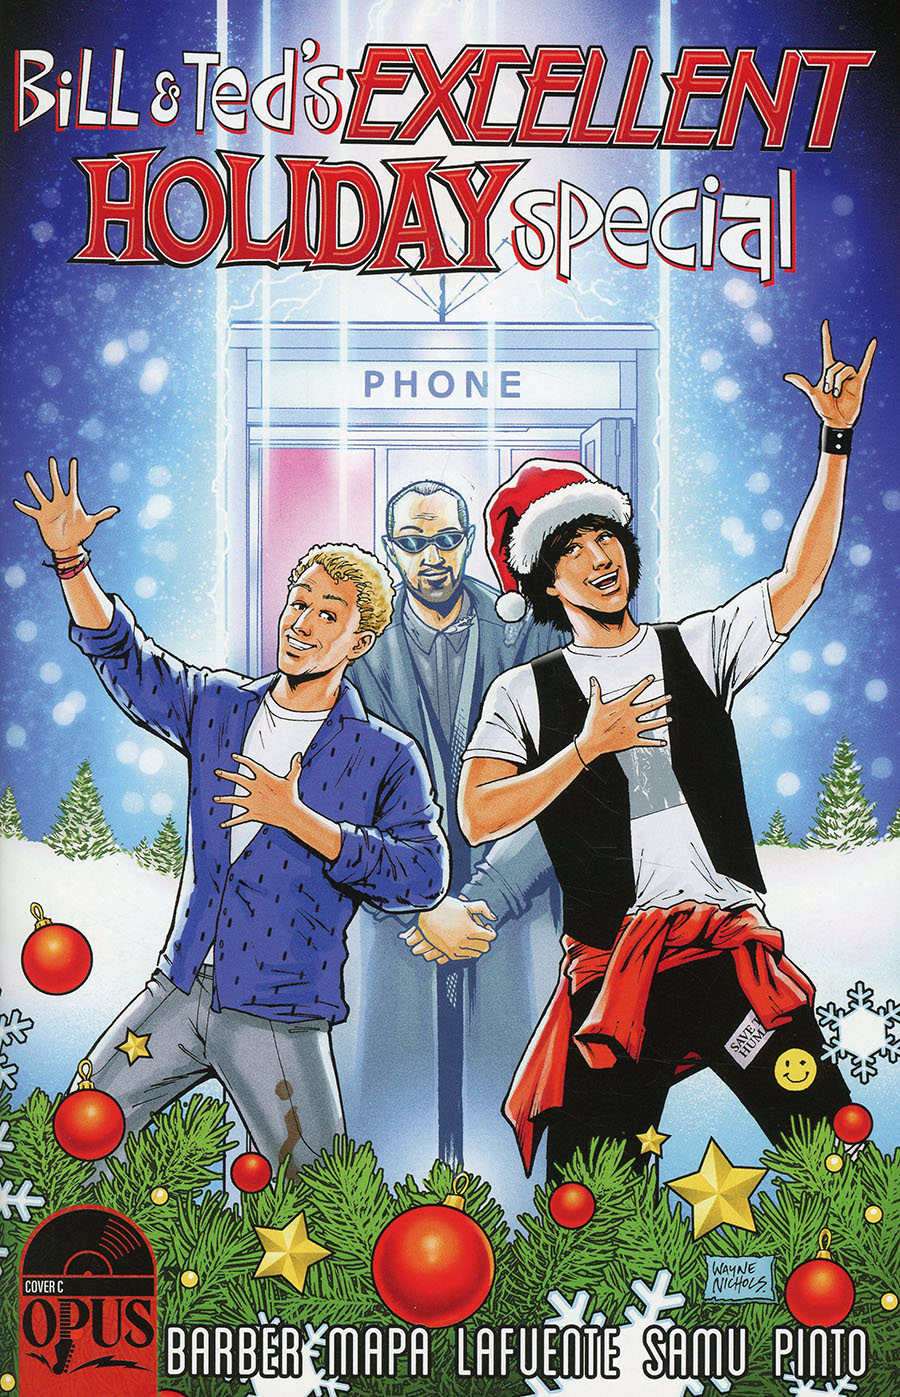 Bill & Teds Excellent Holiday Special #1 (One Shot) Cover C Incentive Wayne Nichols Variant Cover